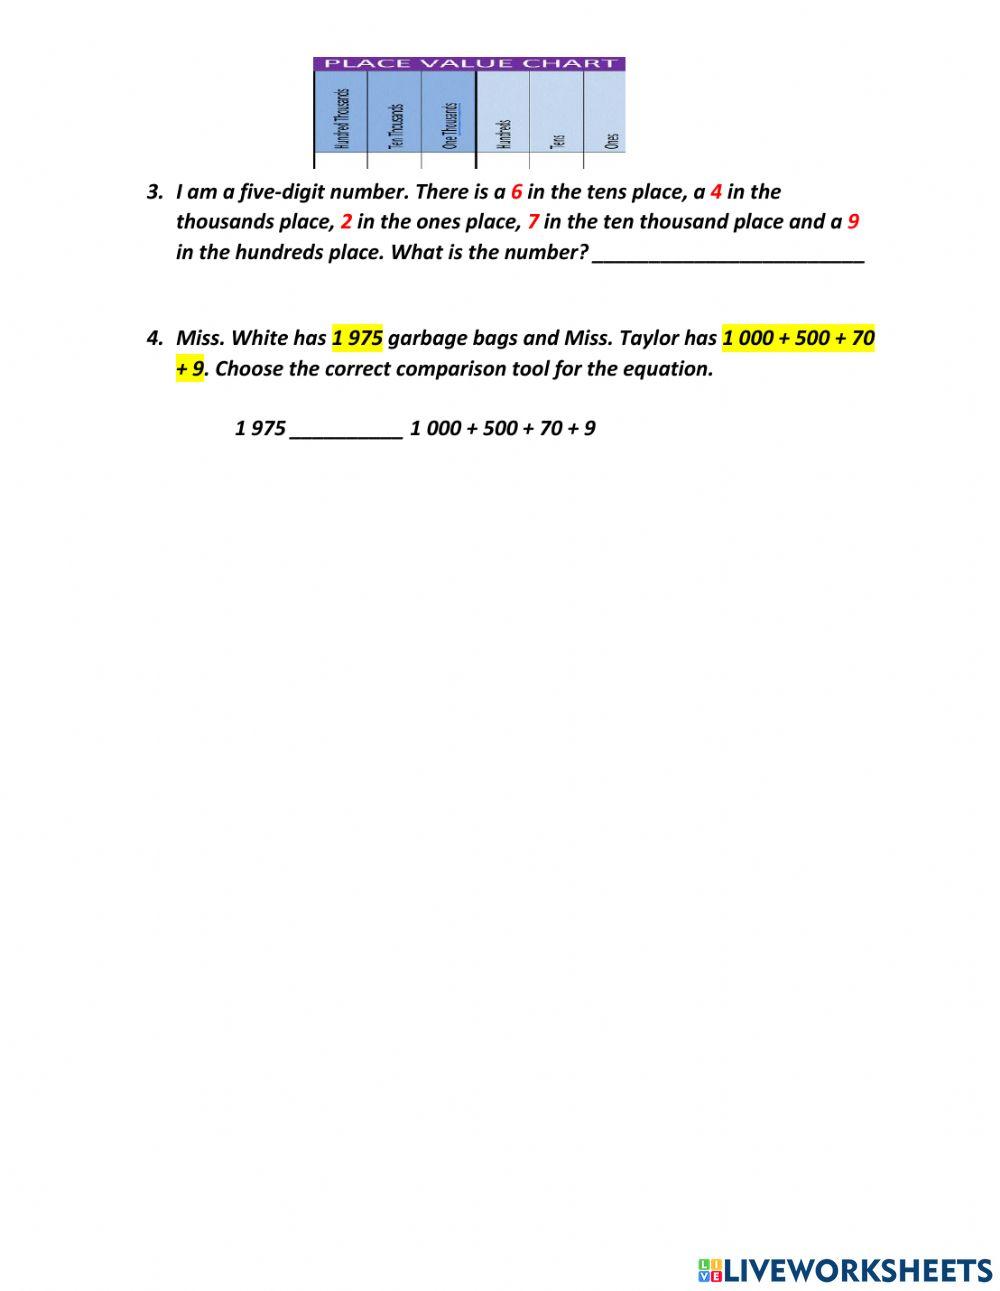 Application Place Value, Comparing, Ordering Numbers